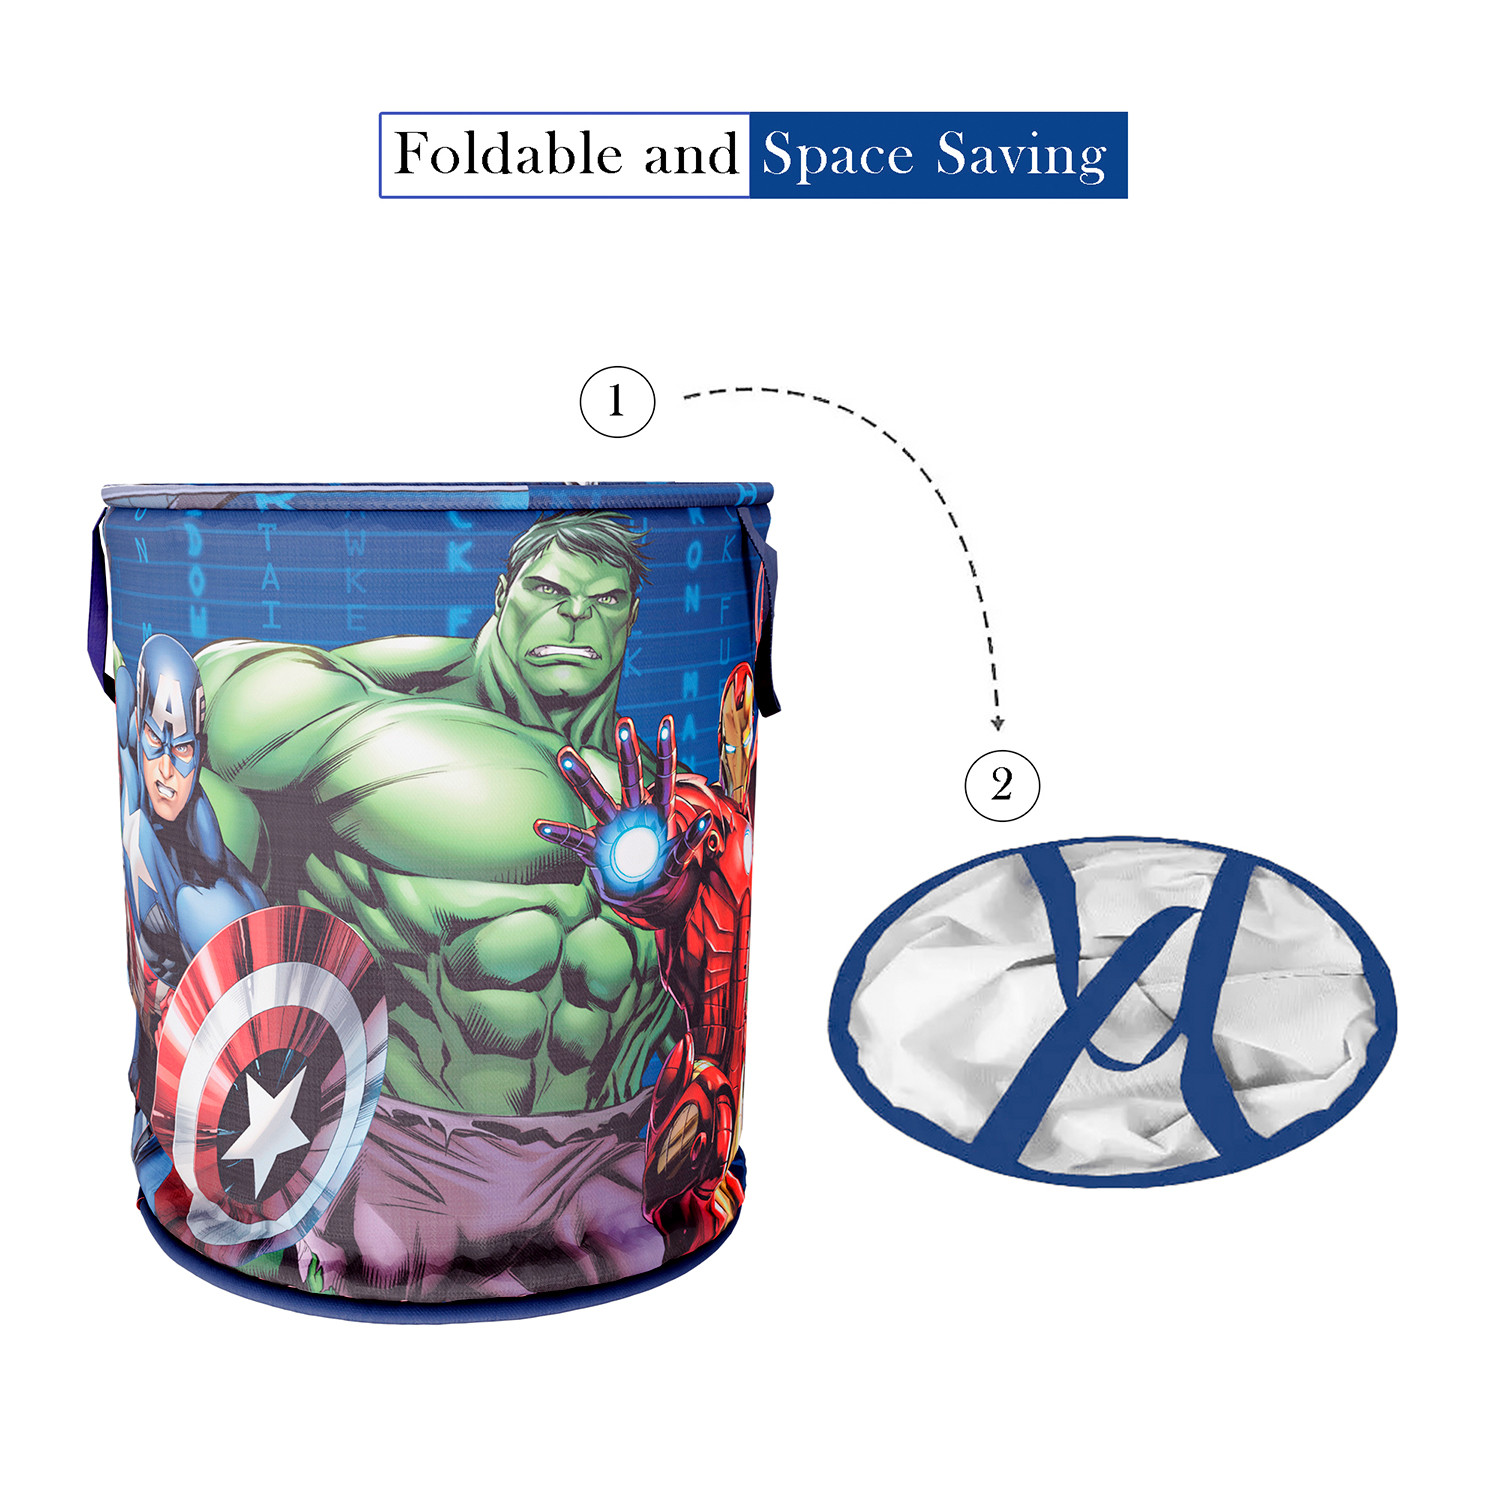 Kuber Industries Marvel Avengers Print Round Laundry Basket|Polyester Clothes Hamper|Waterproof & Foldable Round Laundry Bag with Handle,45 Ltr.(Navy Blue)